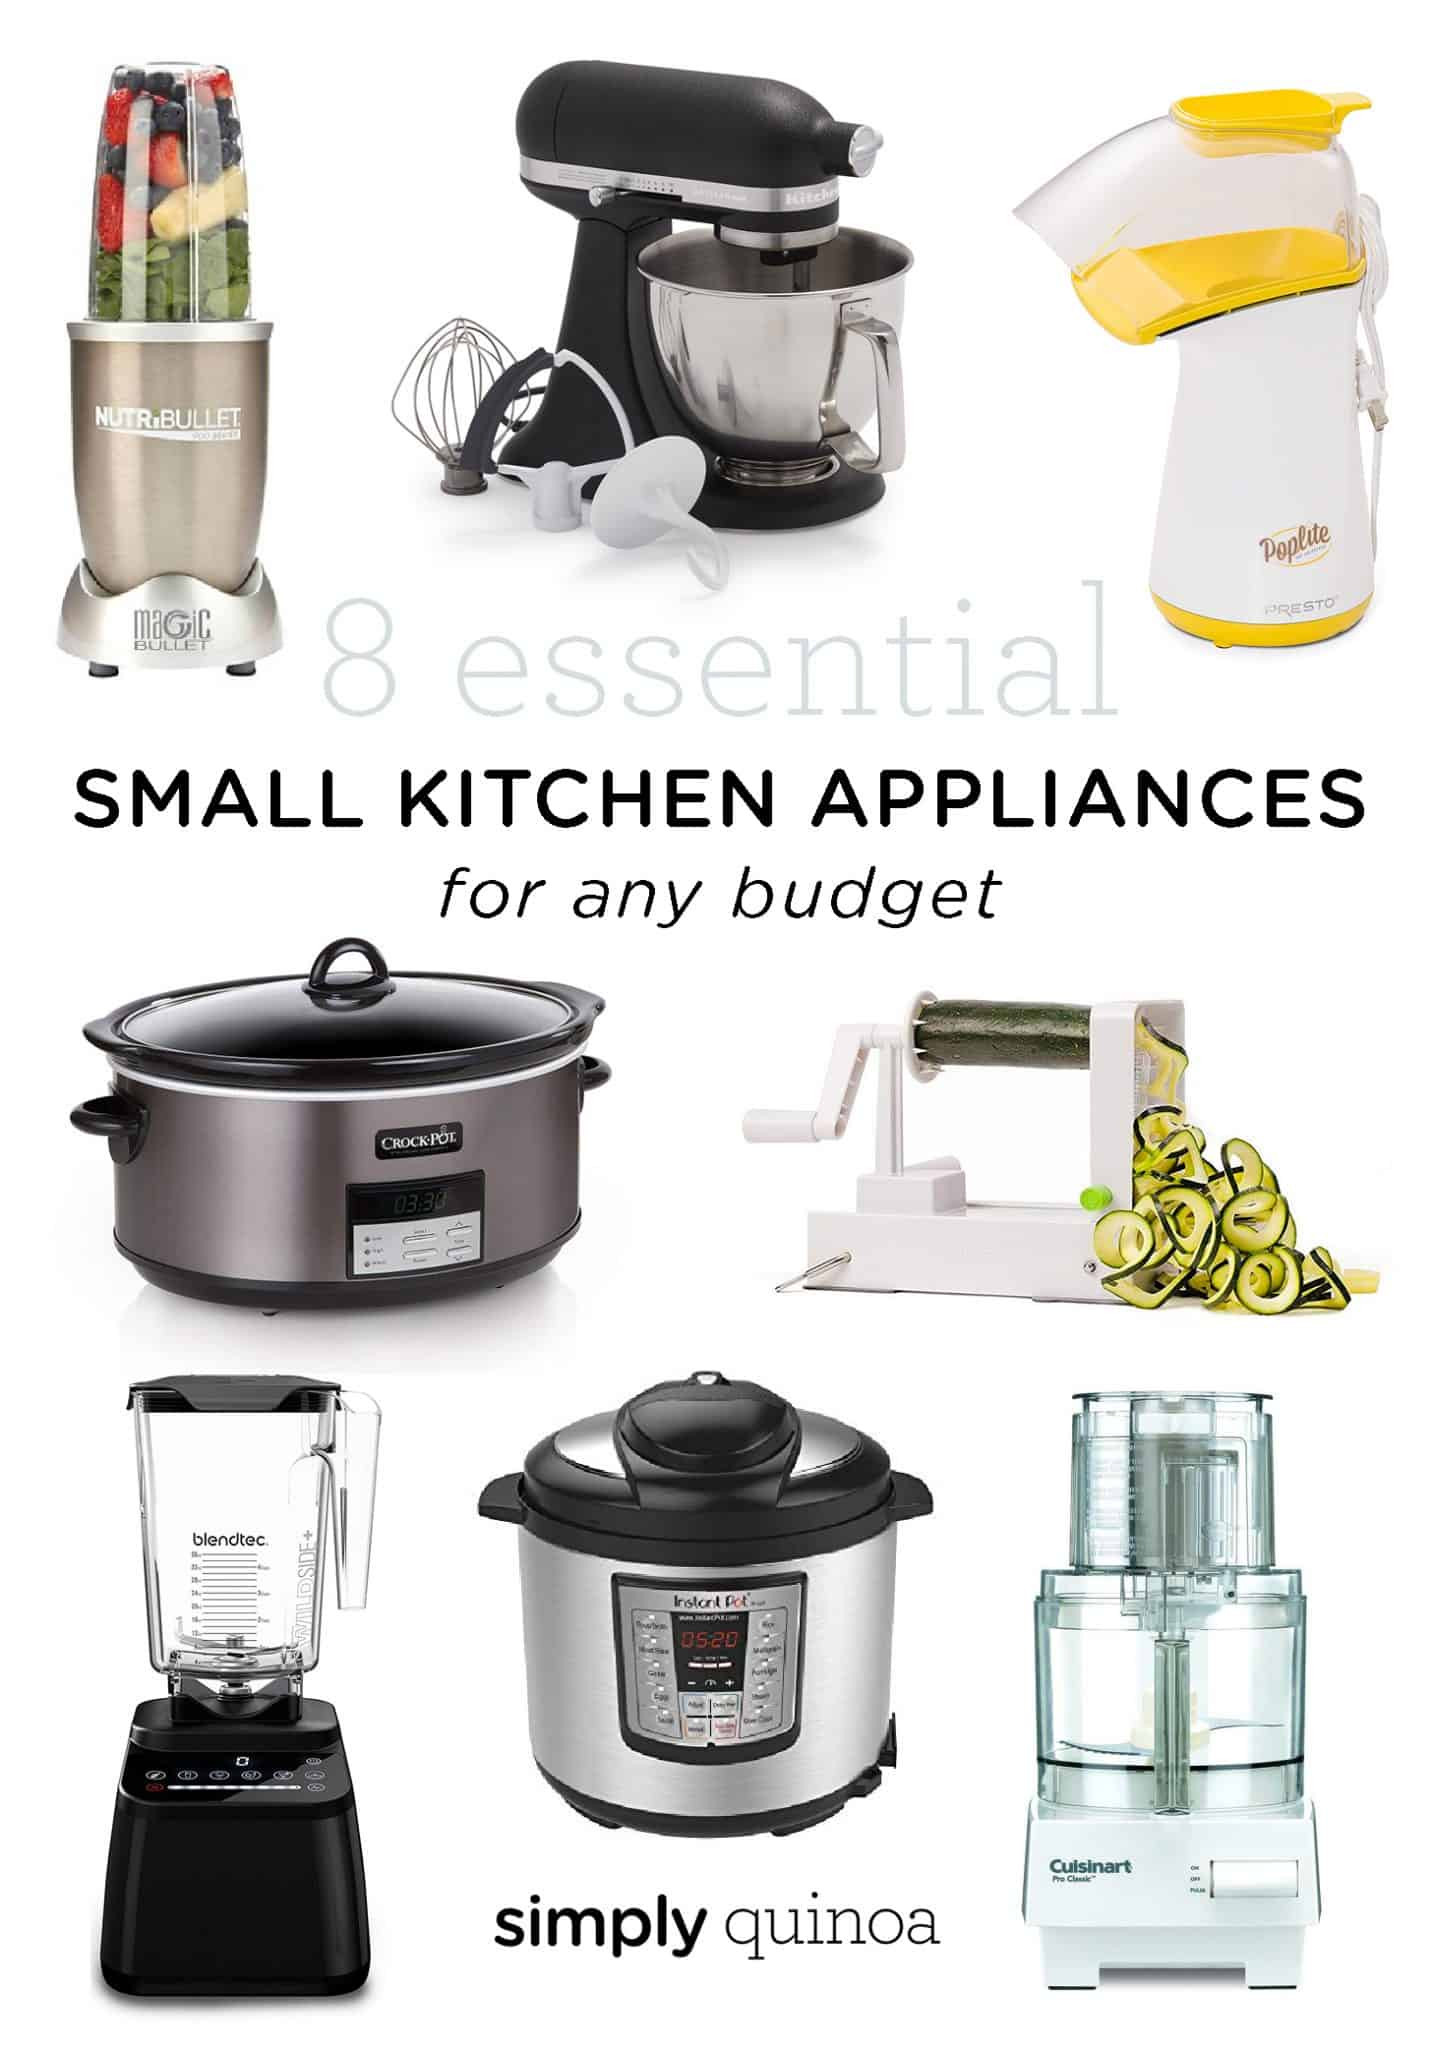 Kitchen Small Appliances
 8 Essential Small Kitchen Appliances for Any Bud